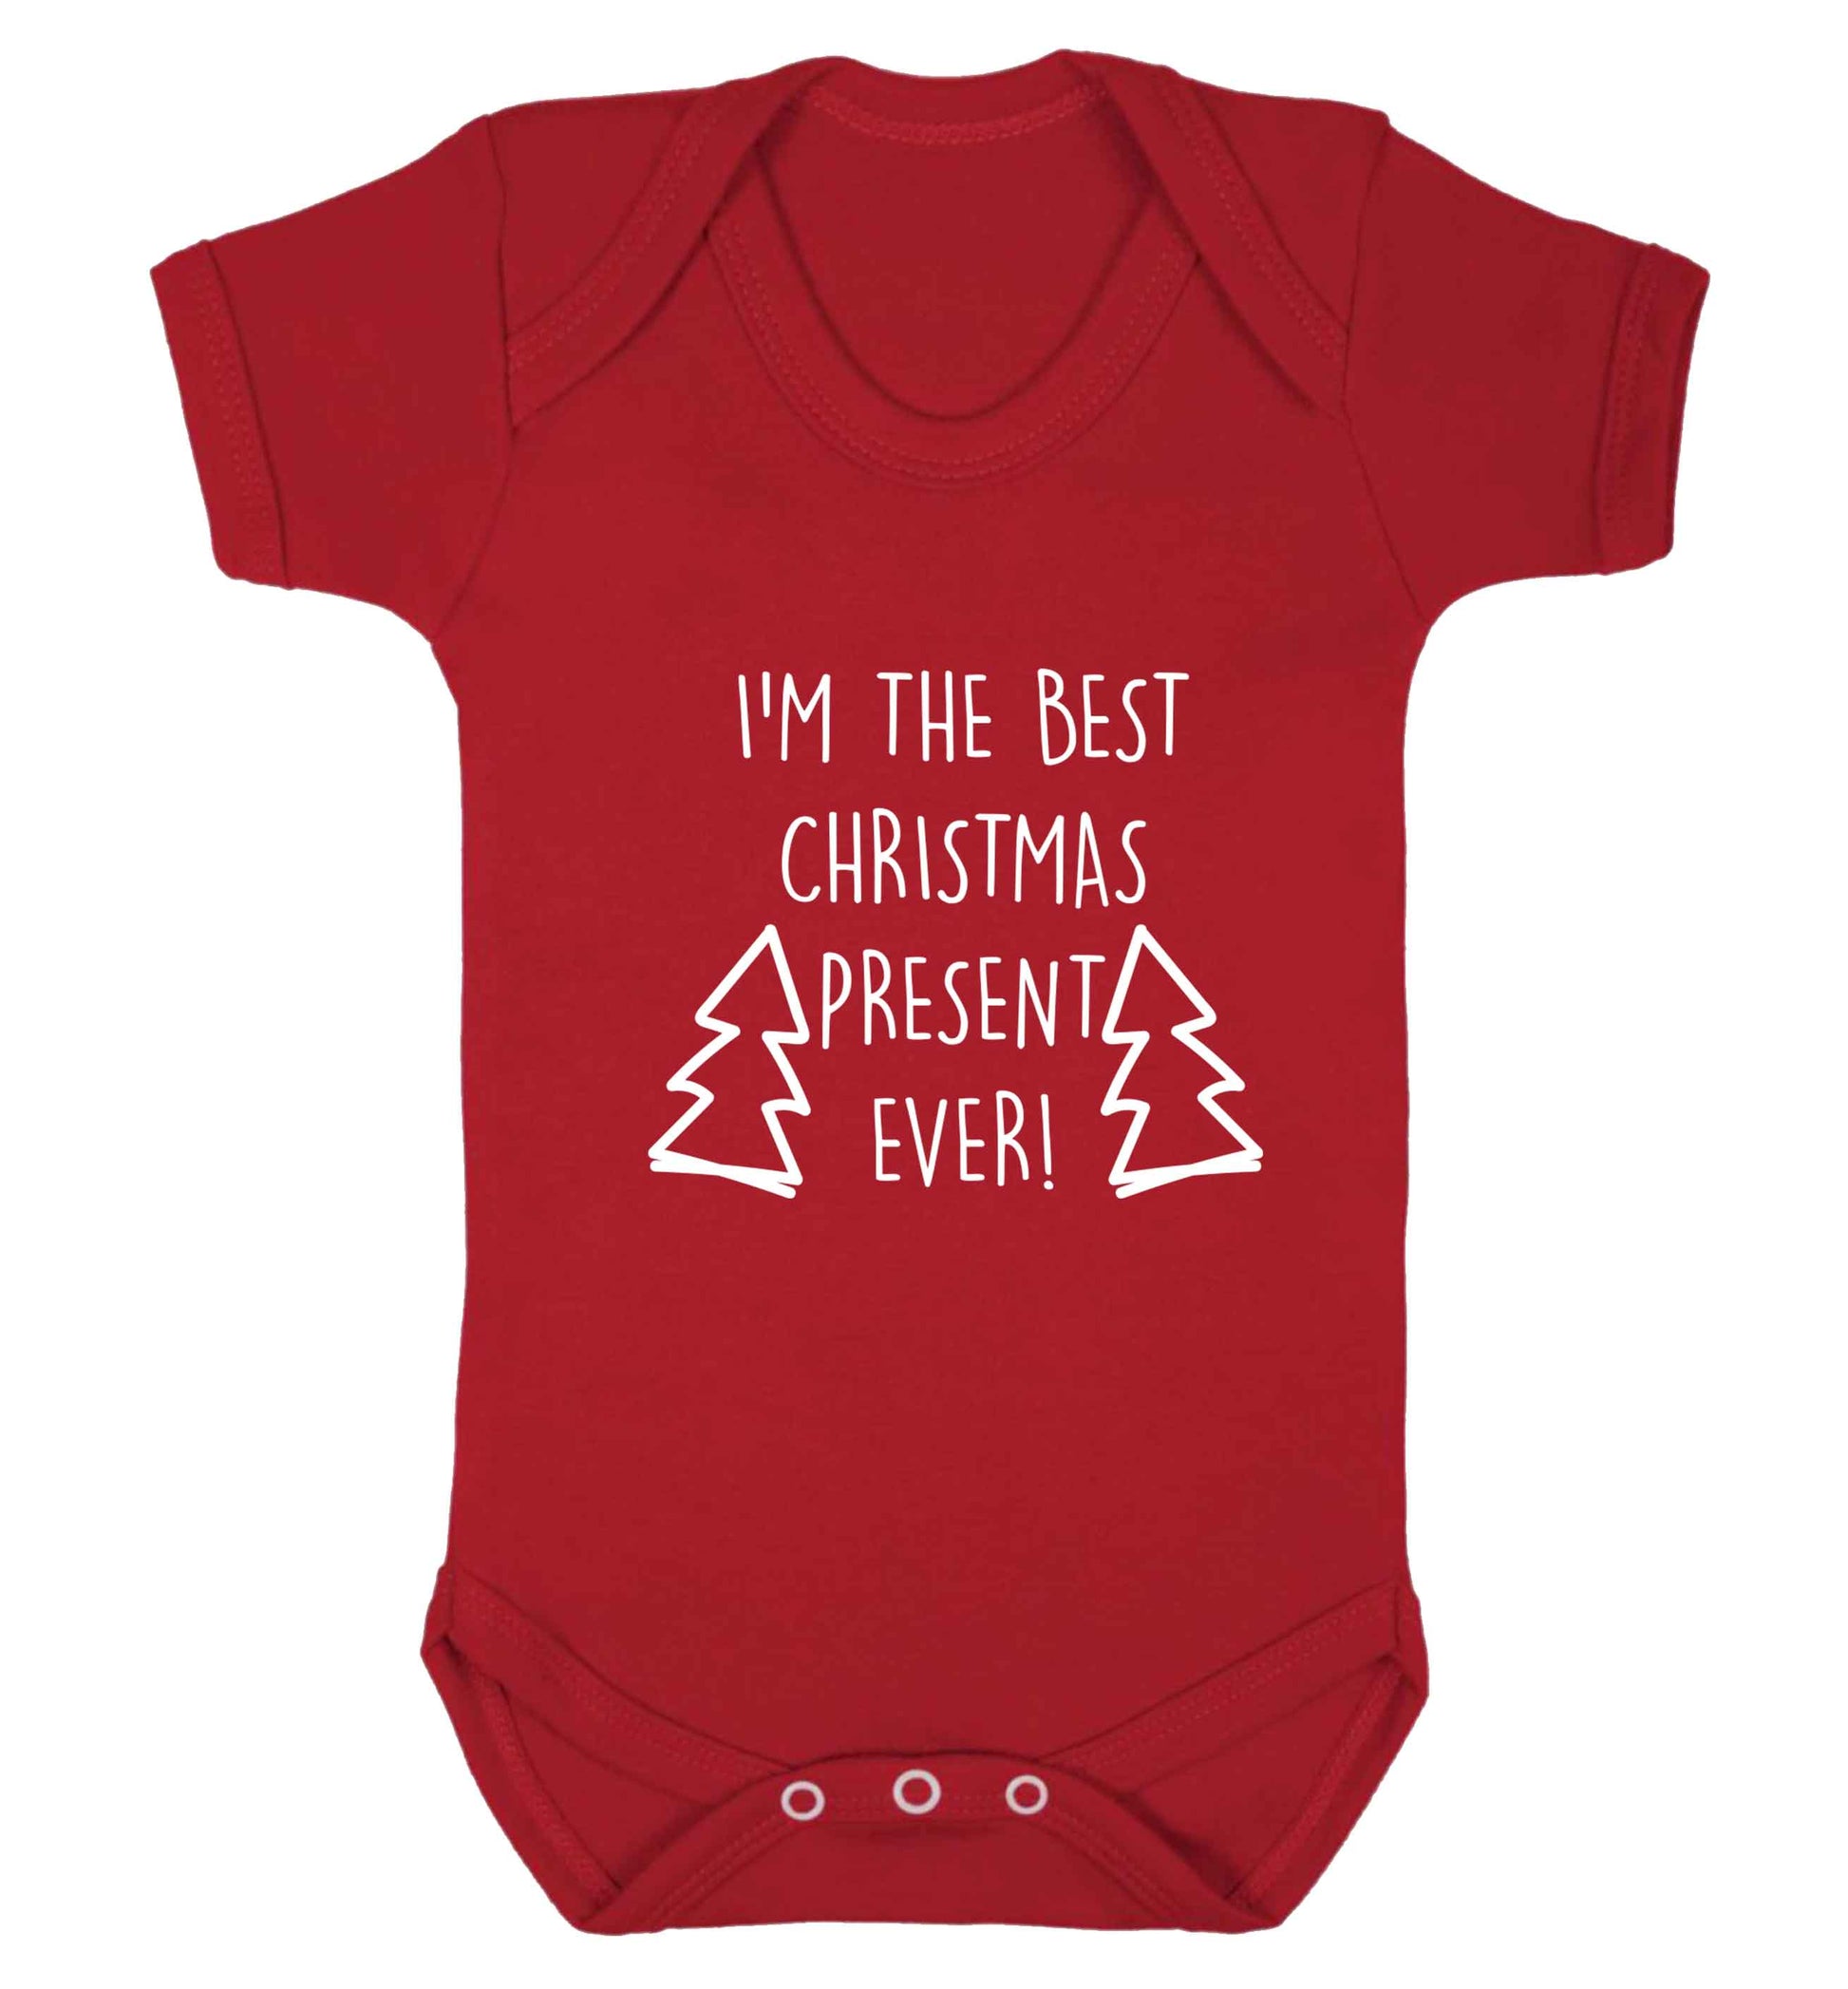 I'm the best Christmas present ever baby vest red 18-24 months